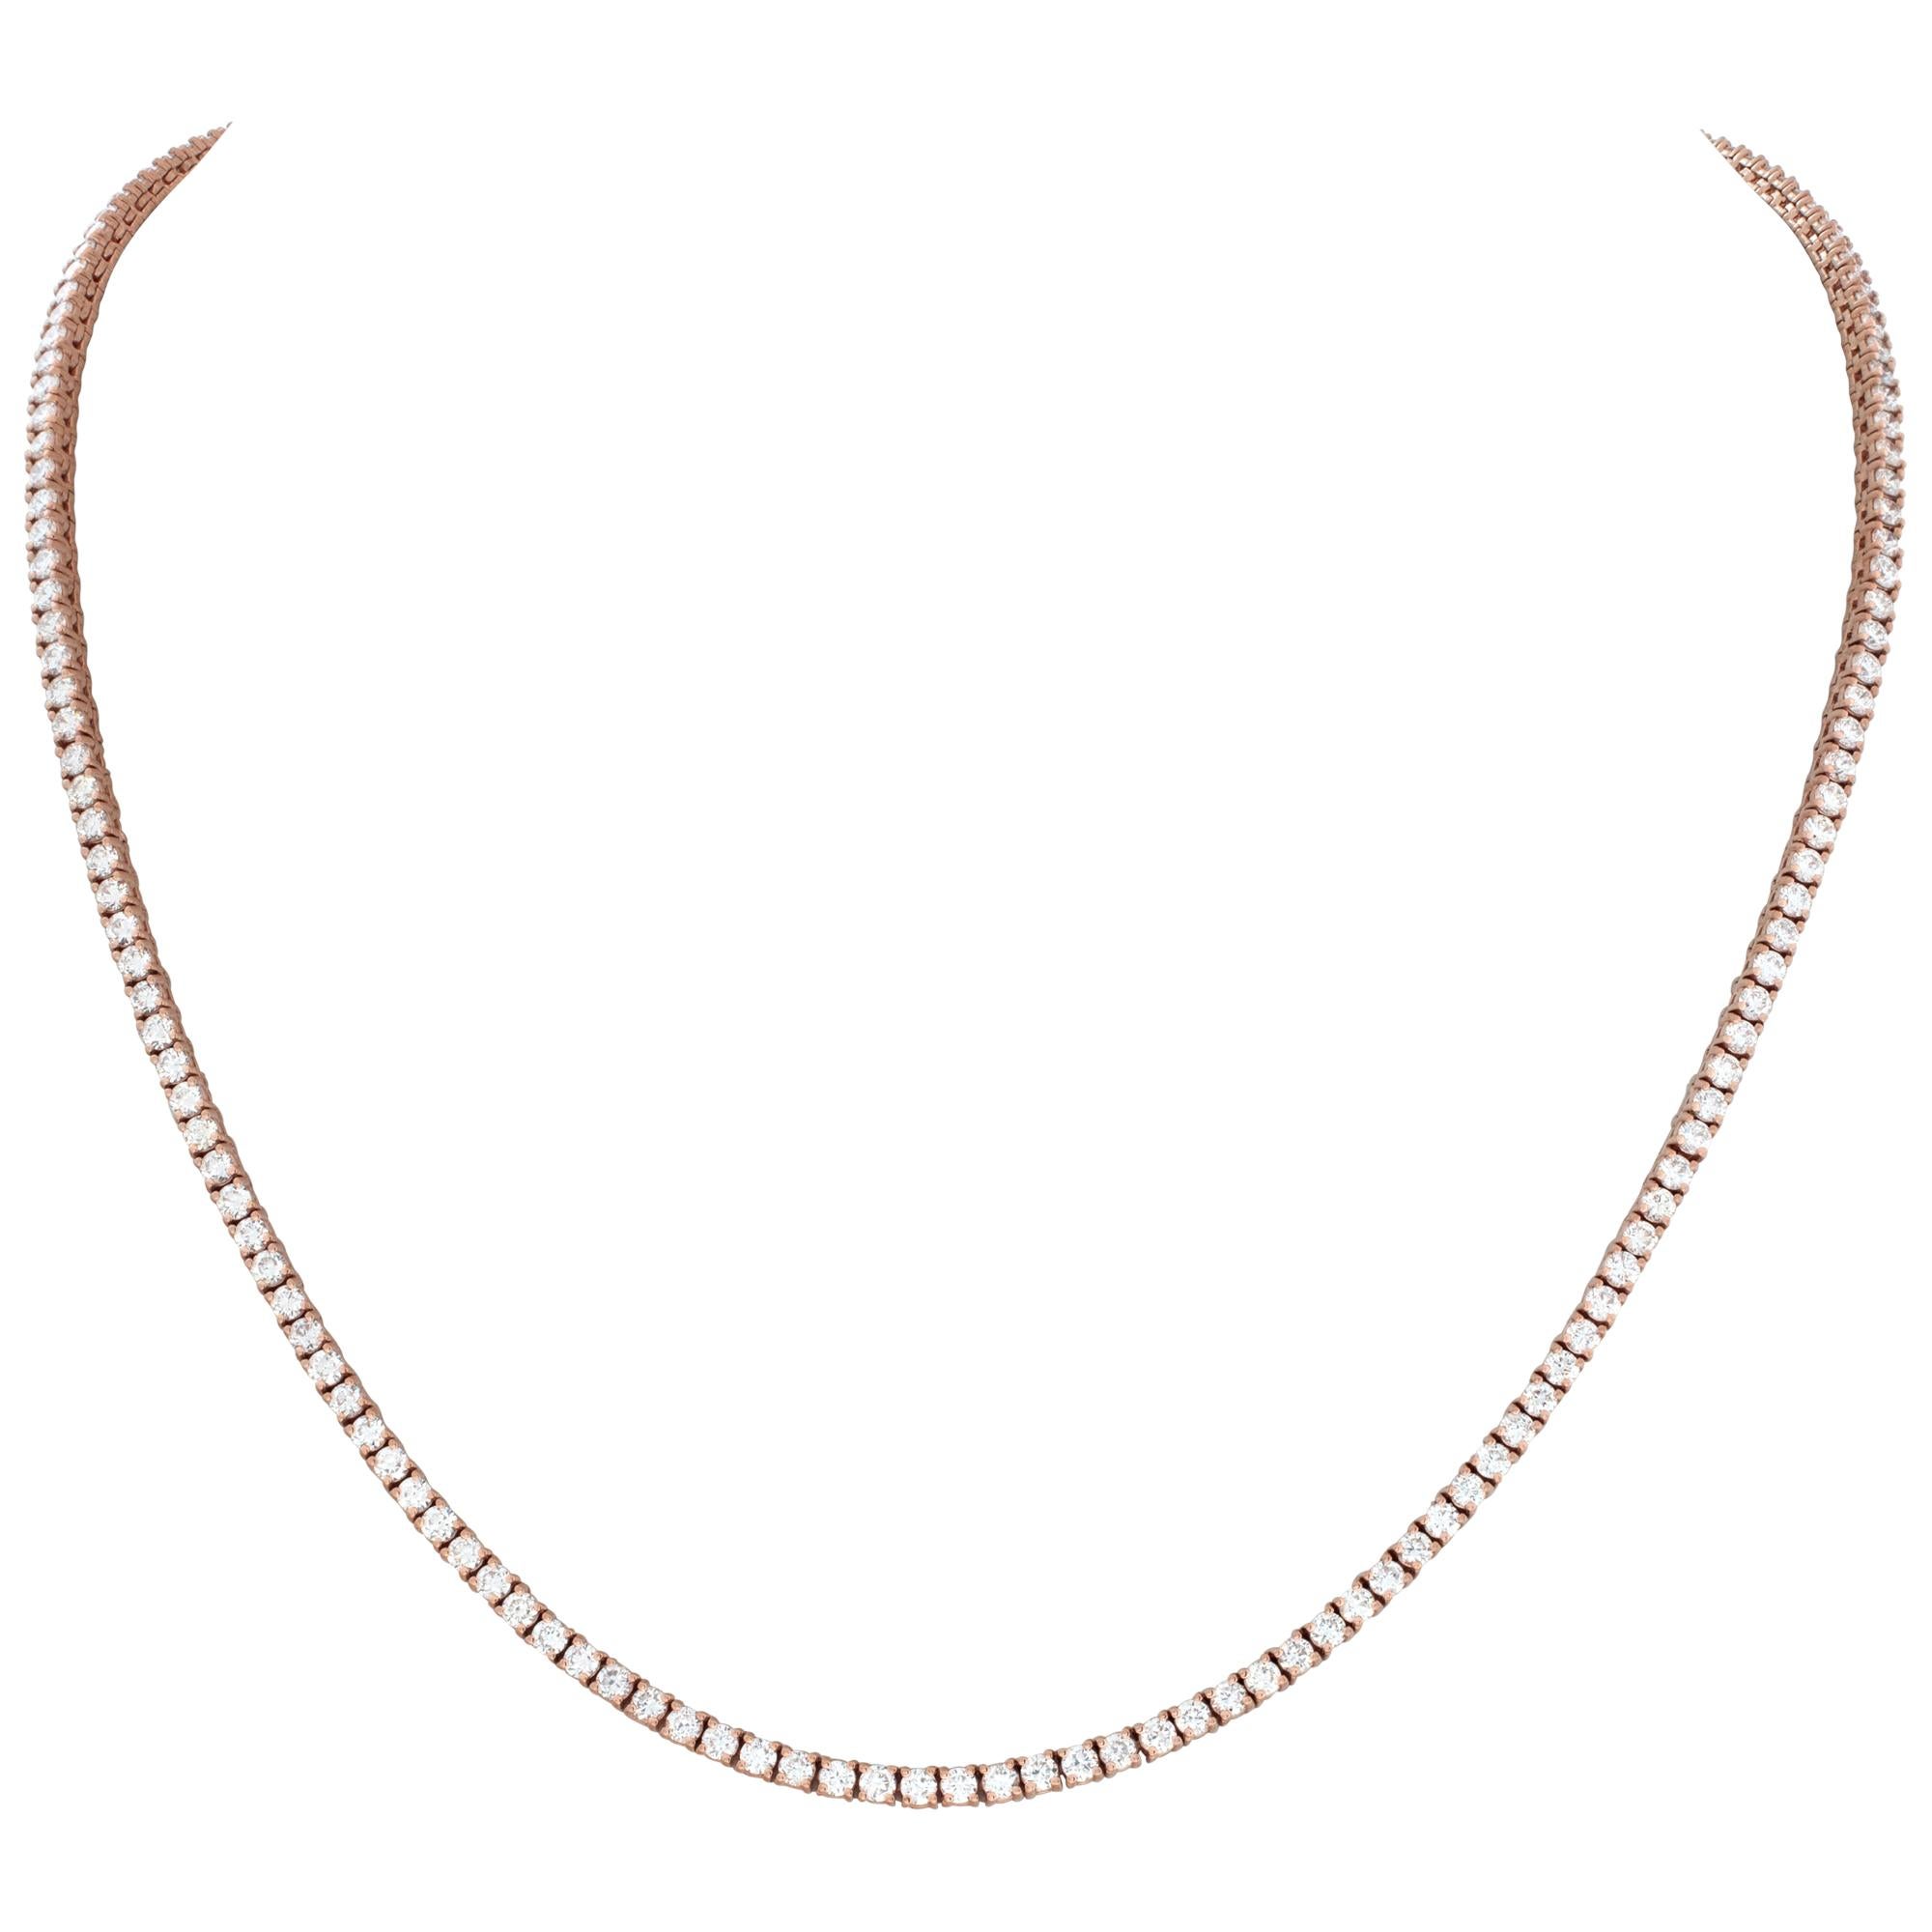 Diamond tennis necklace in 14k rose gold with 6.45 carats in diamonds H-I color and SI clarity. Measures 16 inch length, width 2.5mm.